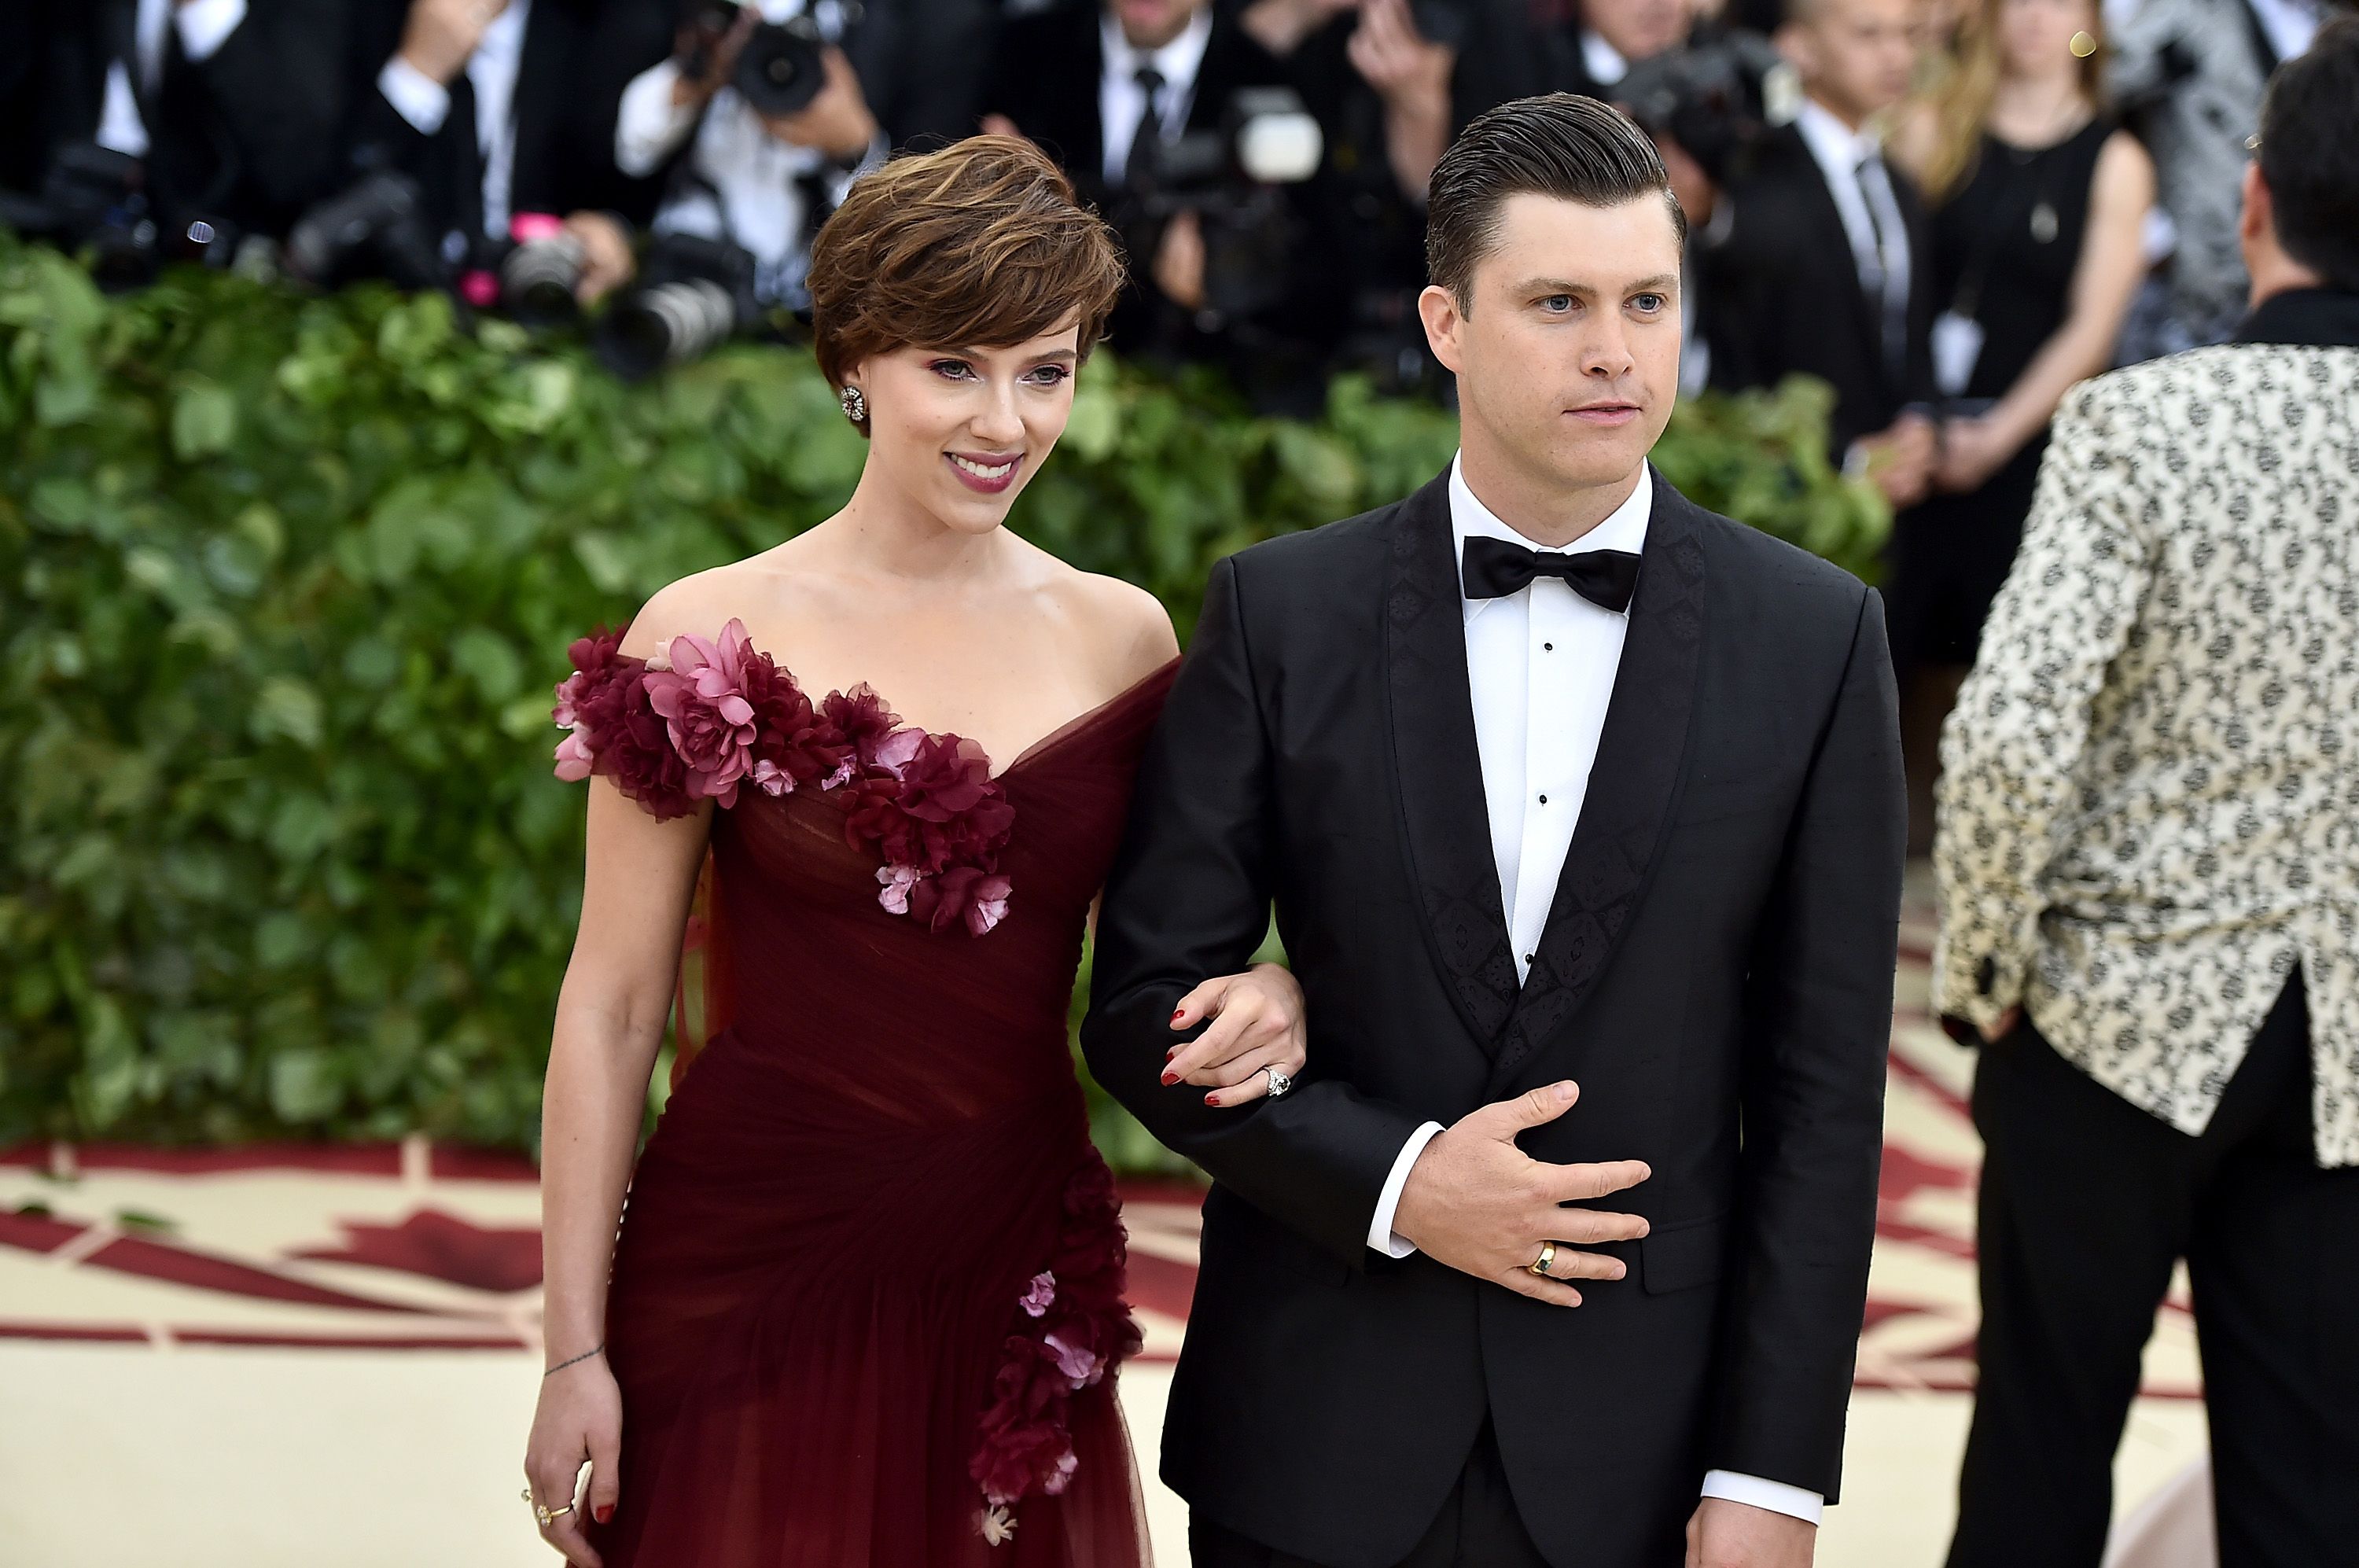  Scarlett Johansson and Colin Jost at the 2018 MET Gala in New York City | Source: Getty Images